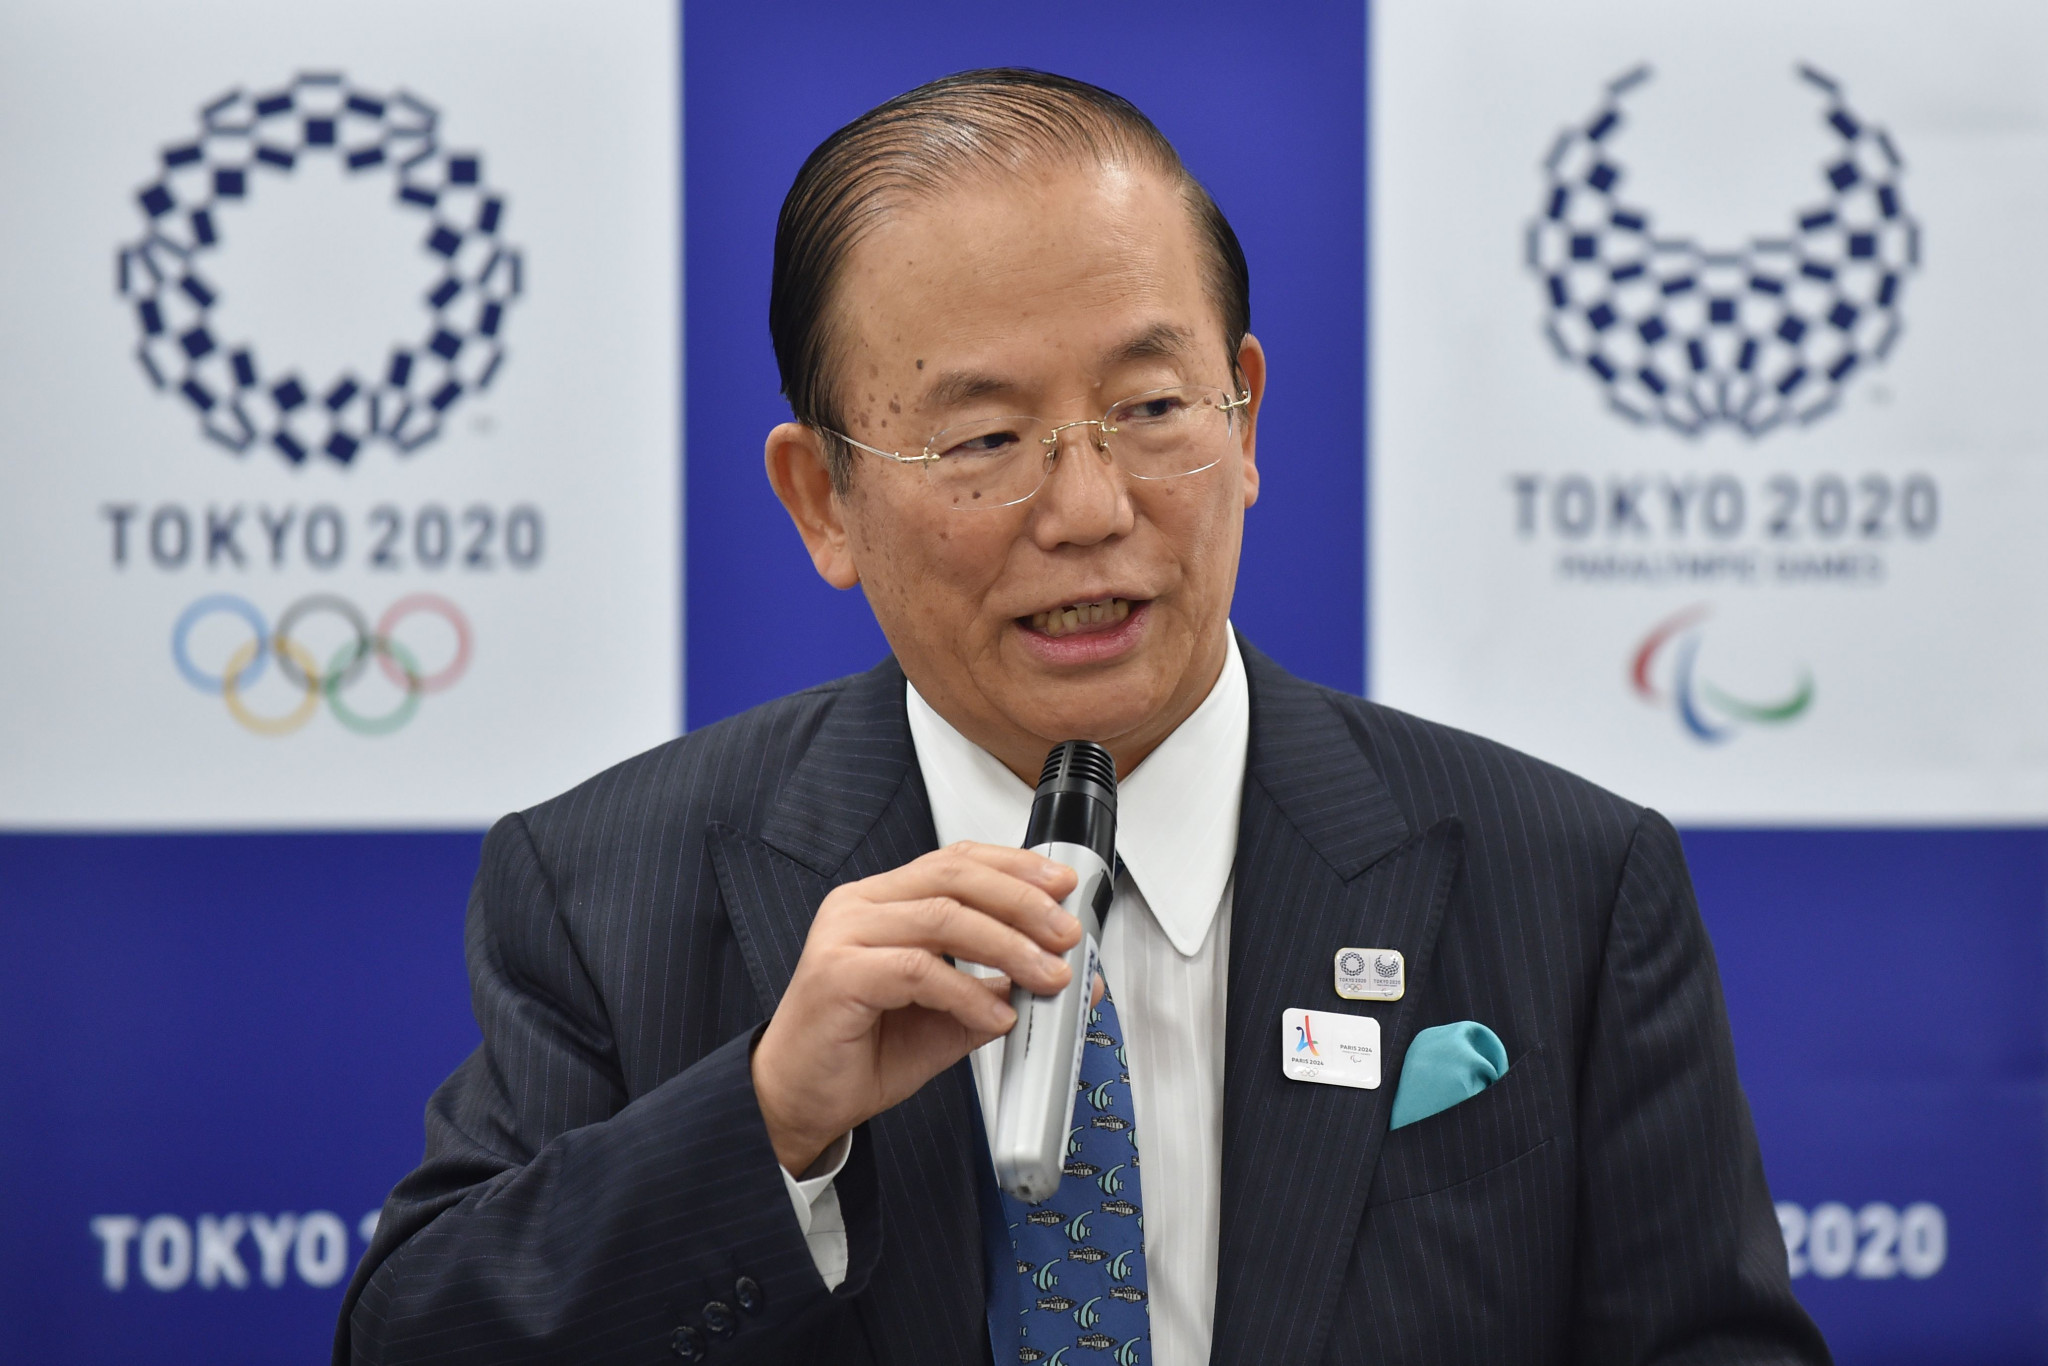 Tokyo 2020 chief executive Toshirō Mutō has sought to reassure the Japanese public that the cost of hosting next year’s Olympic and Paralympic Games will not exceed budgeted estimates ©Getty Images